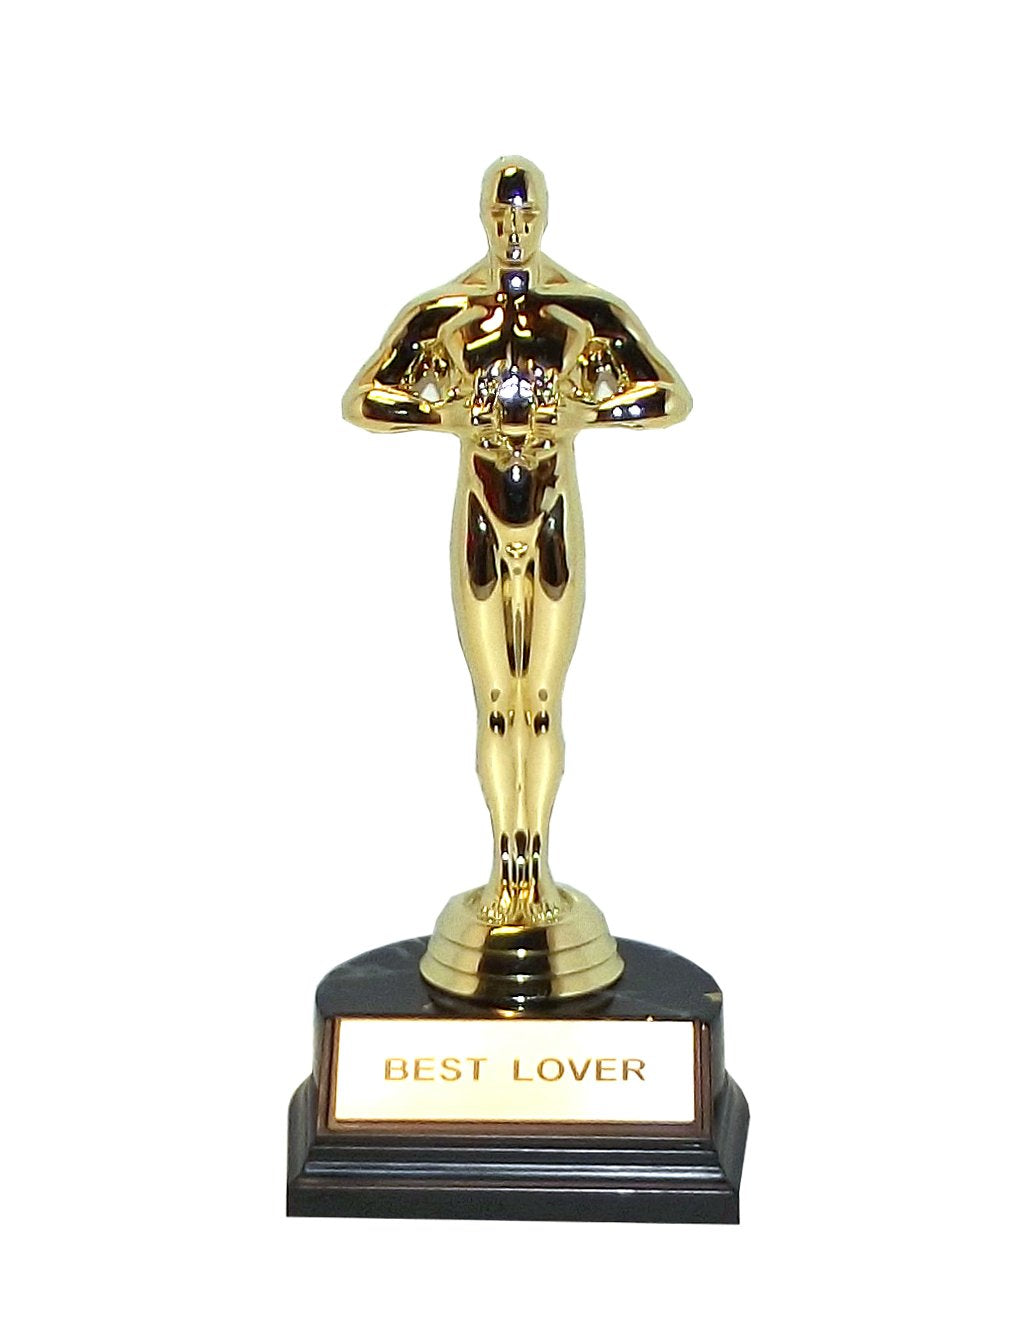 aahs!! Engraving Valentine's Day Trophies (Best Lover)